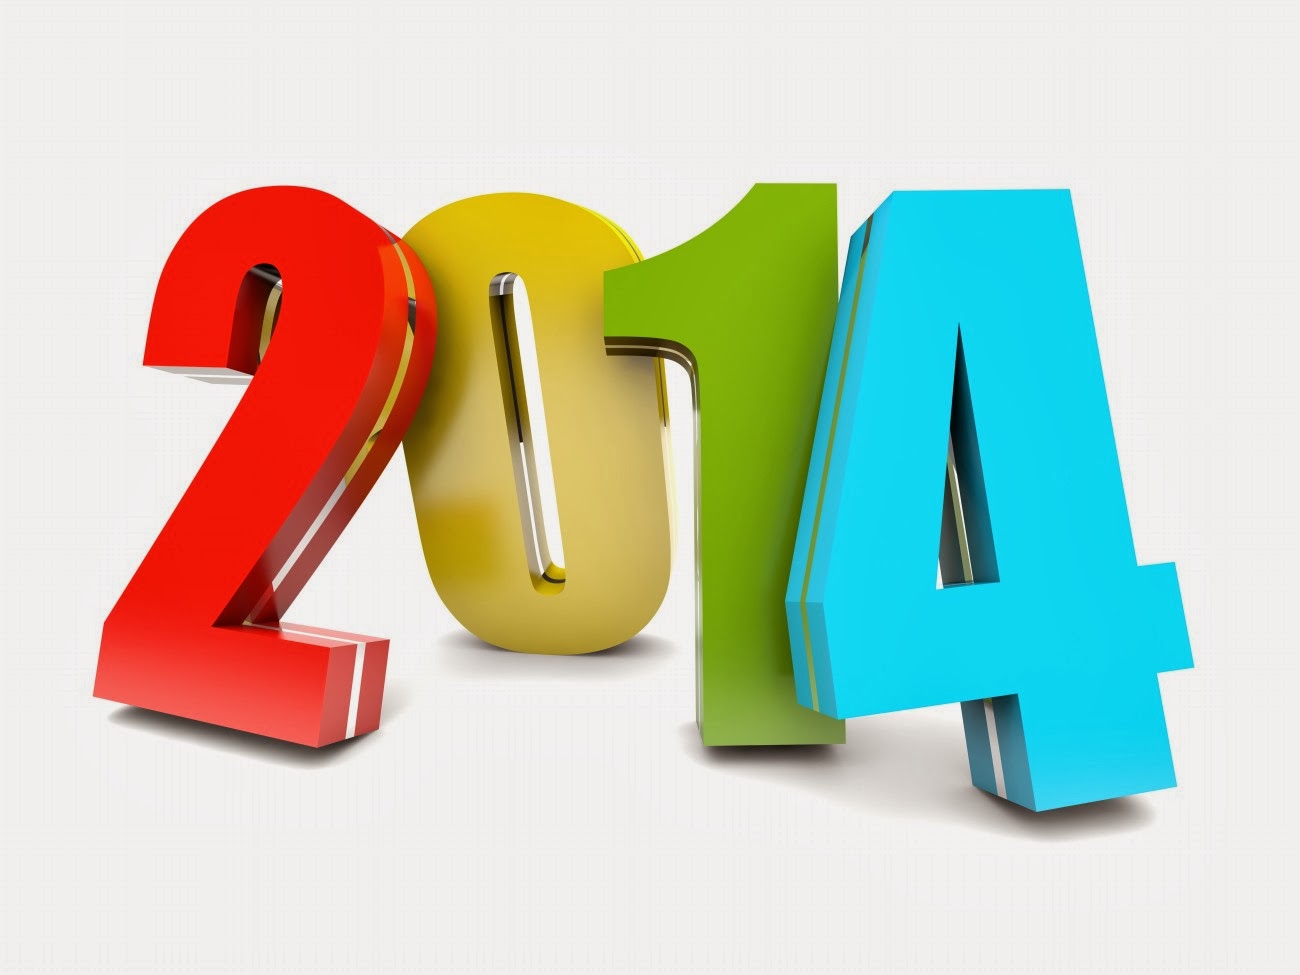 new years pictures clip art 2014 - photo #32